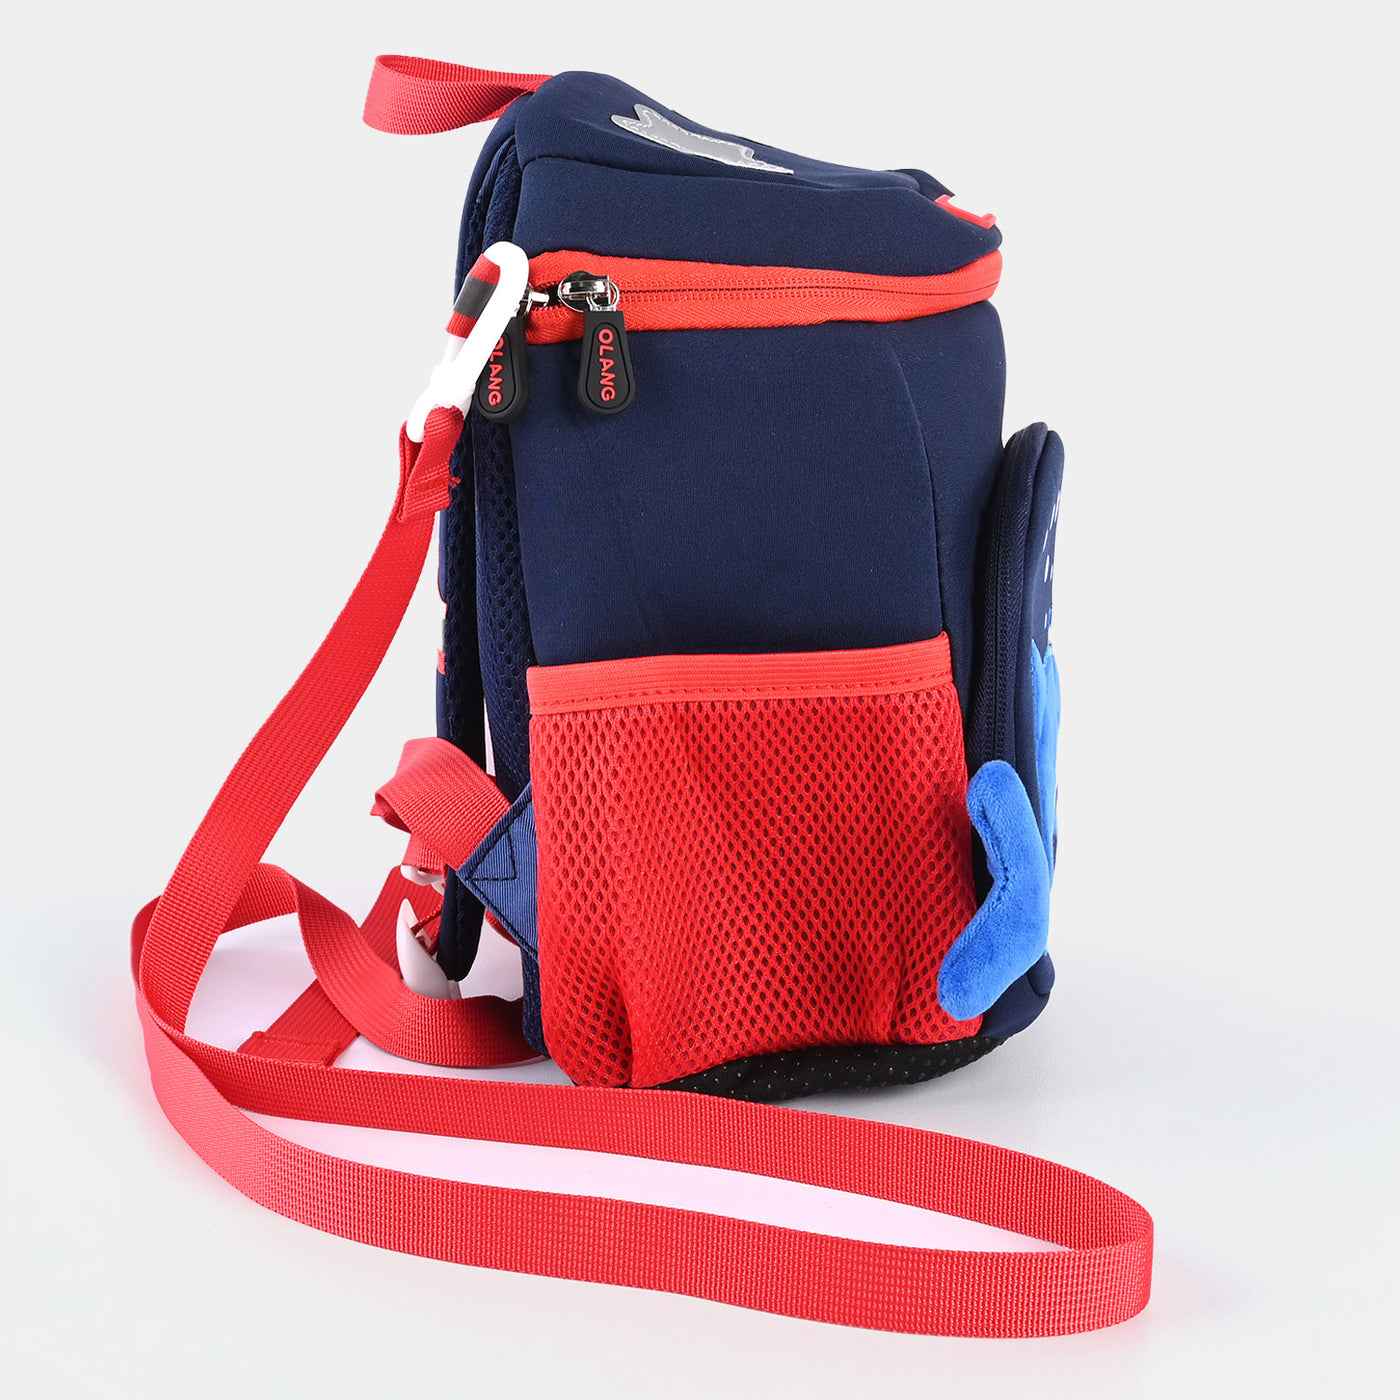 Stylish Fancy BackPack For Kids